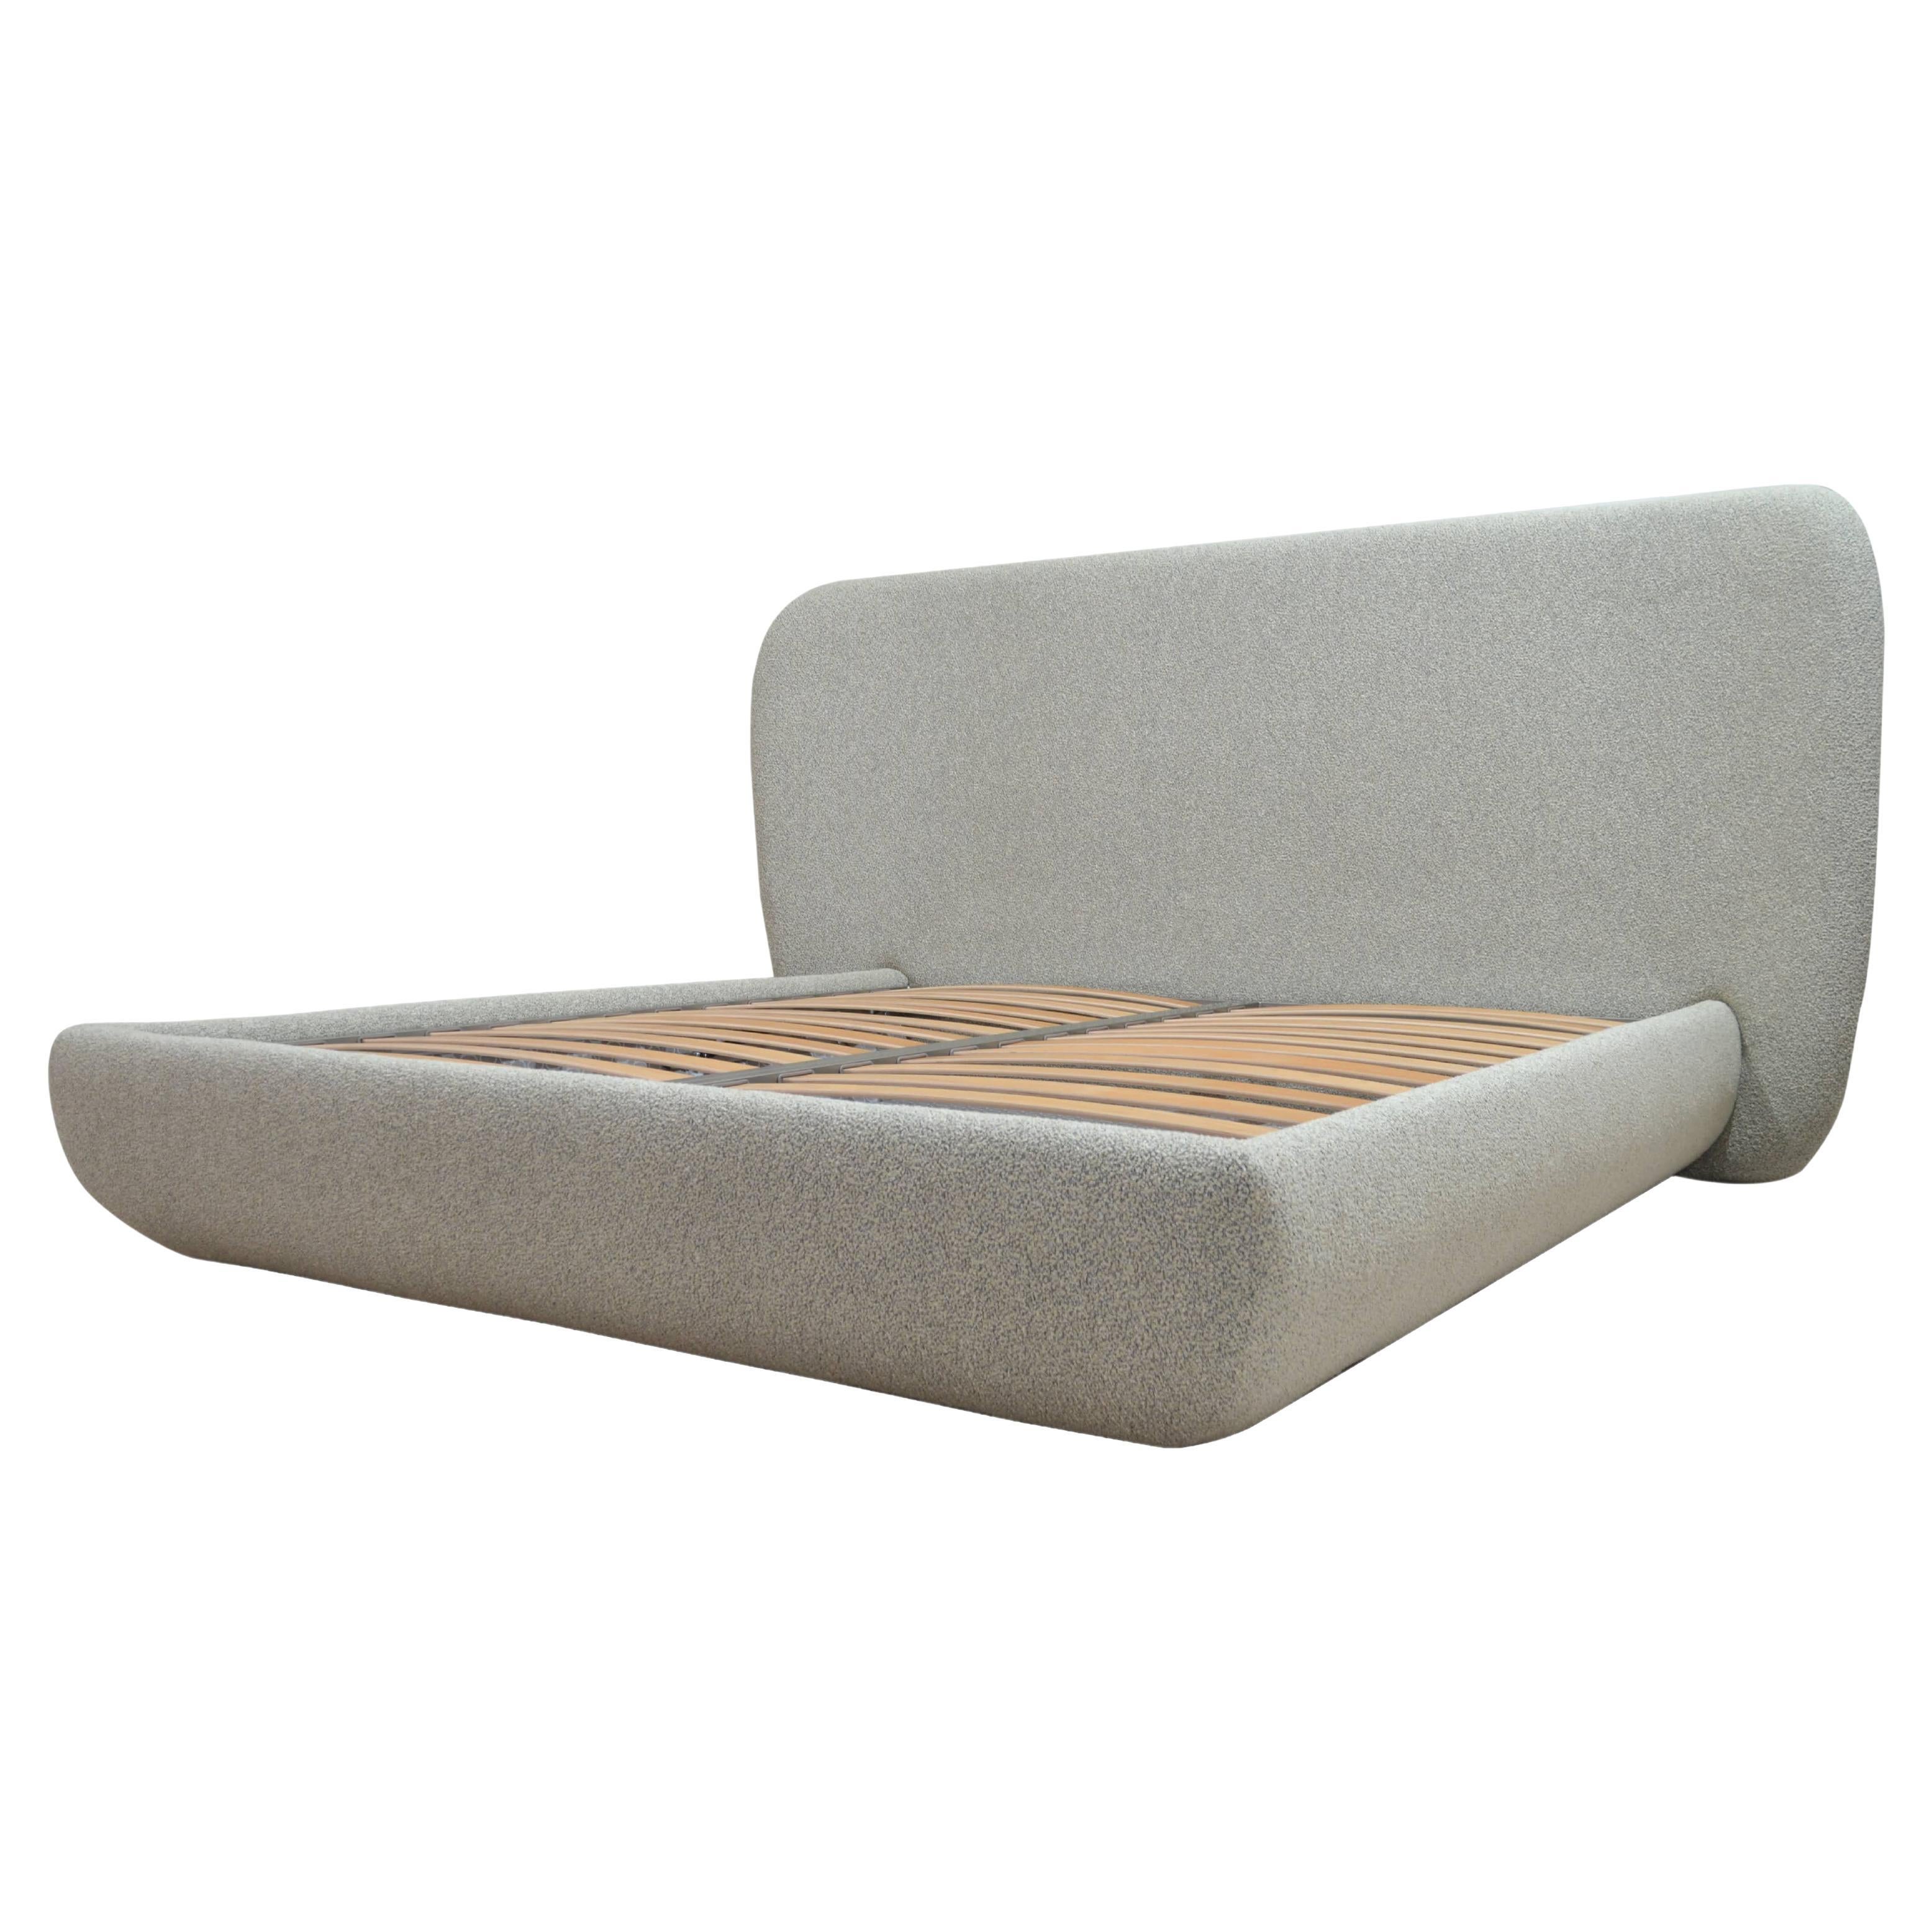 Modern King Size 'Cottonflower' Bed Fully Upholstered In Torri Lana Quinoa Fabric For Sale